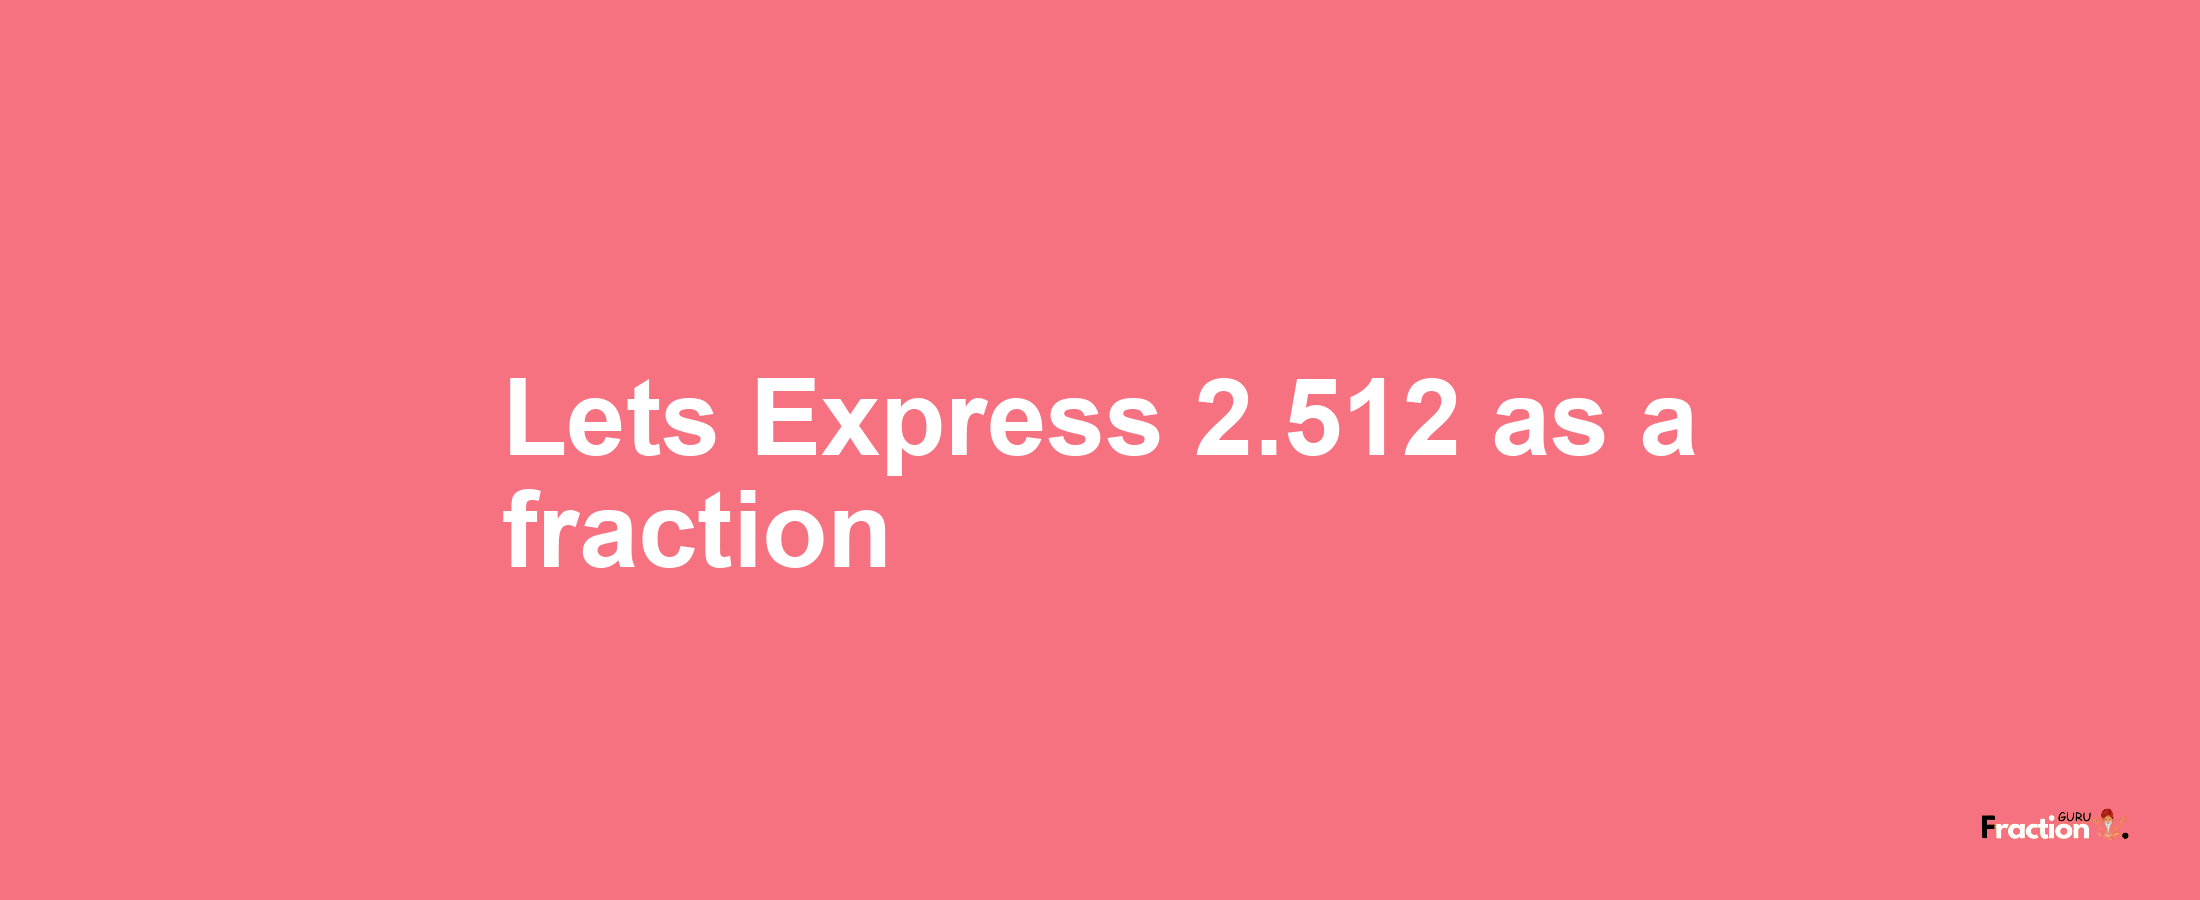 Lets Express 2.512 as afraction